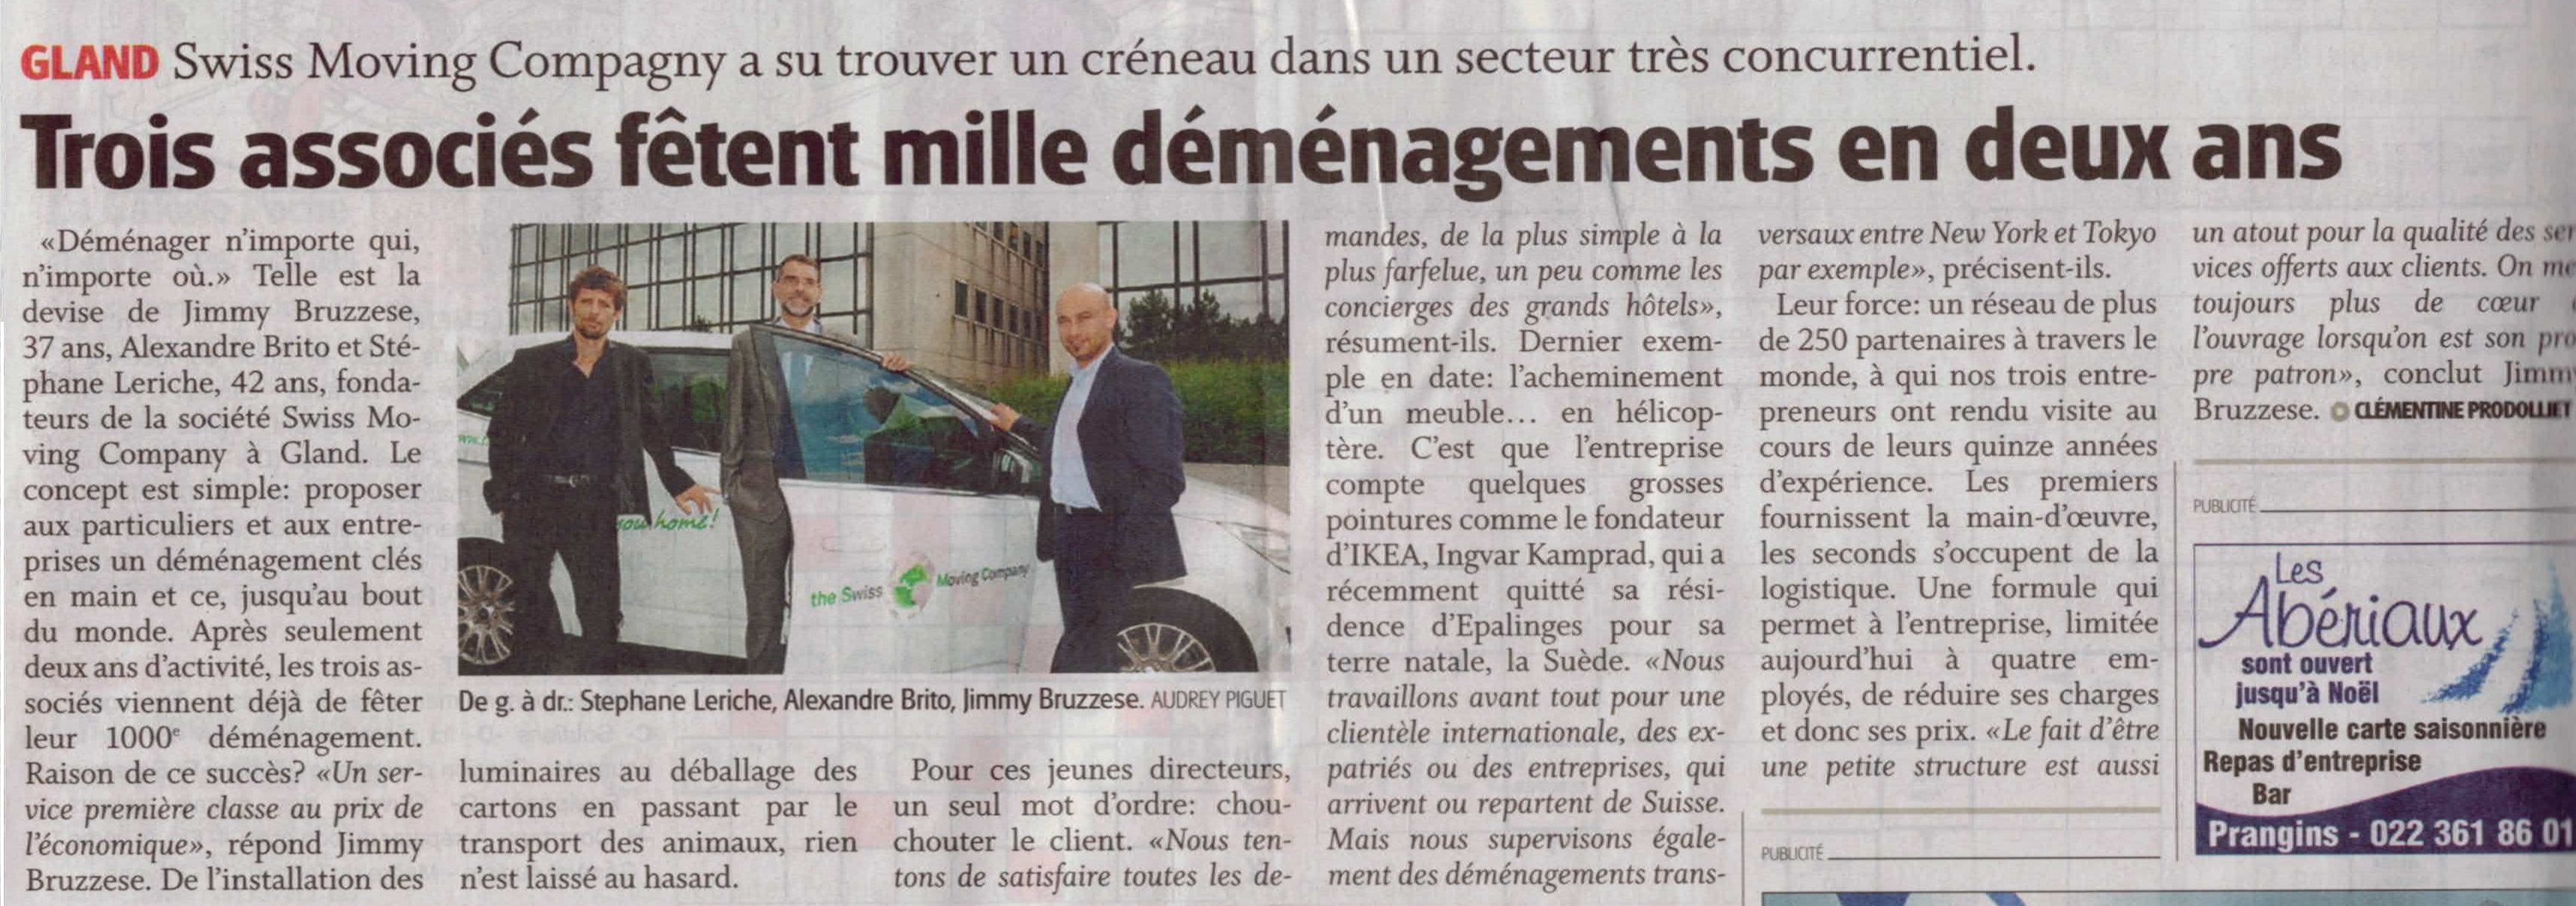 Article La Côte 13.09.2013 - the Swiss Moving Company Celebrates its 1'000th move in only 2 years